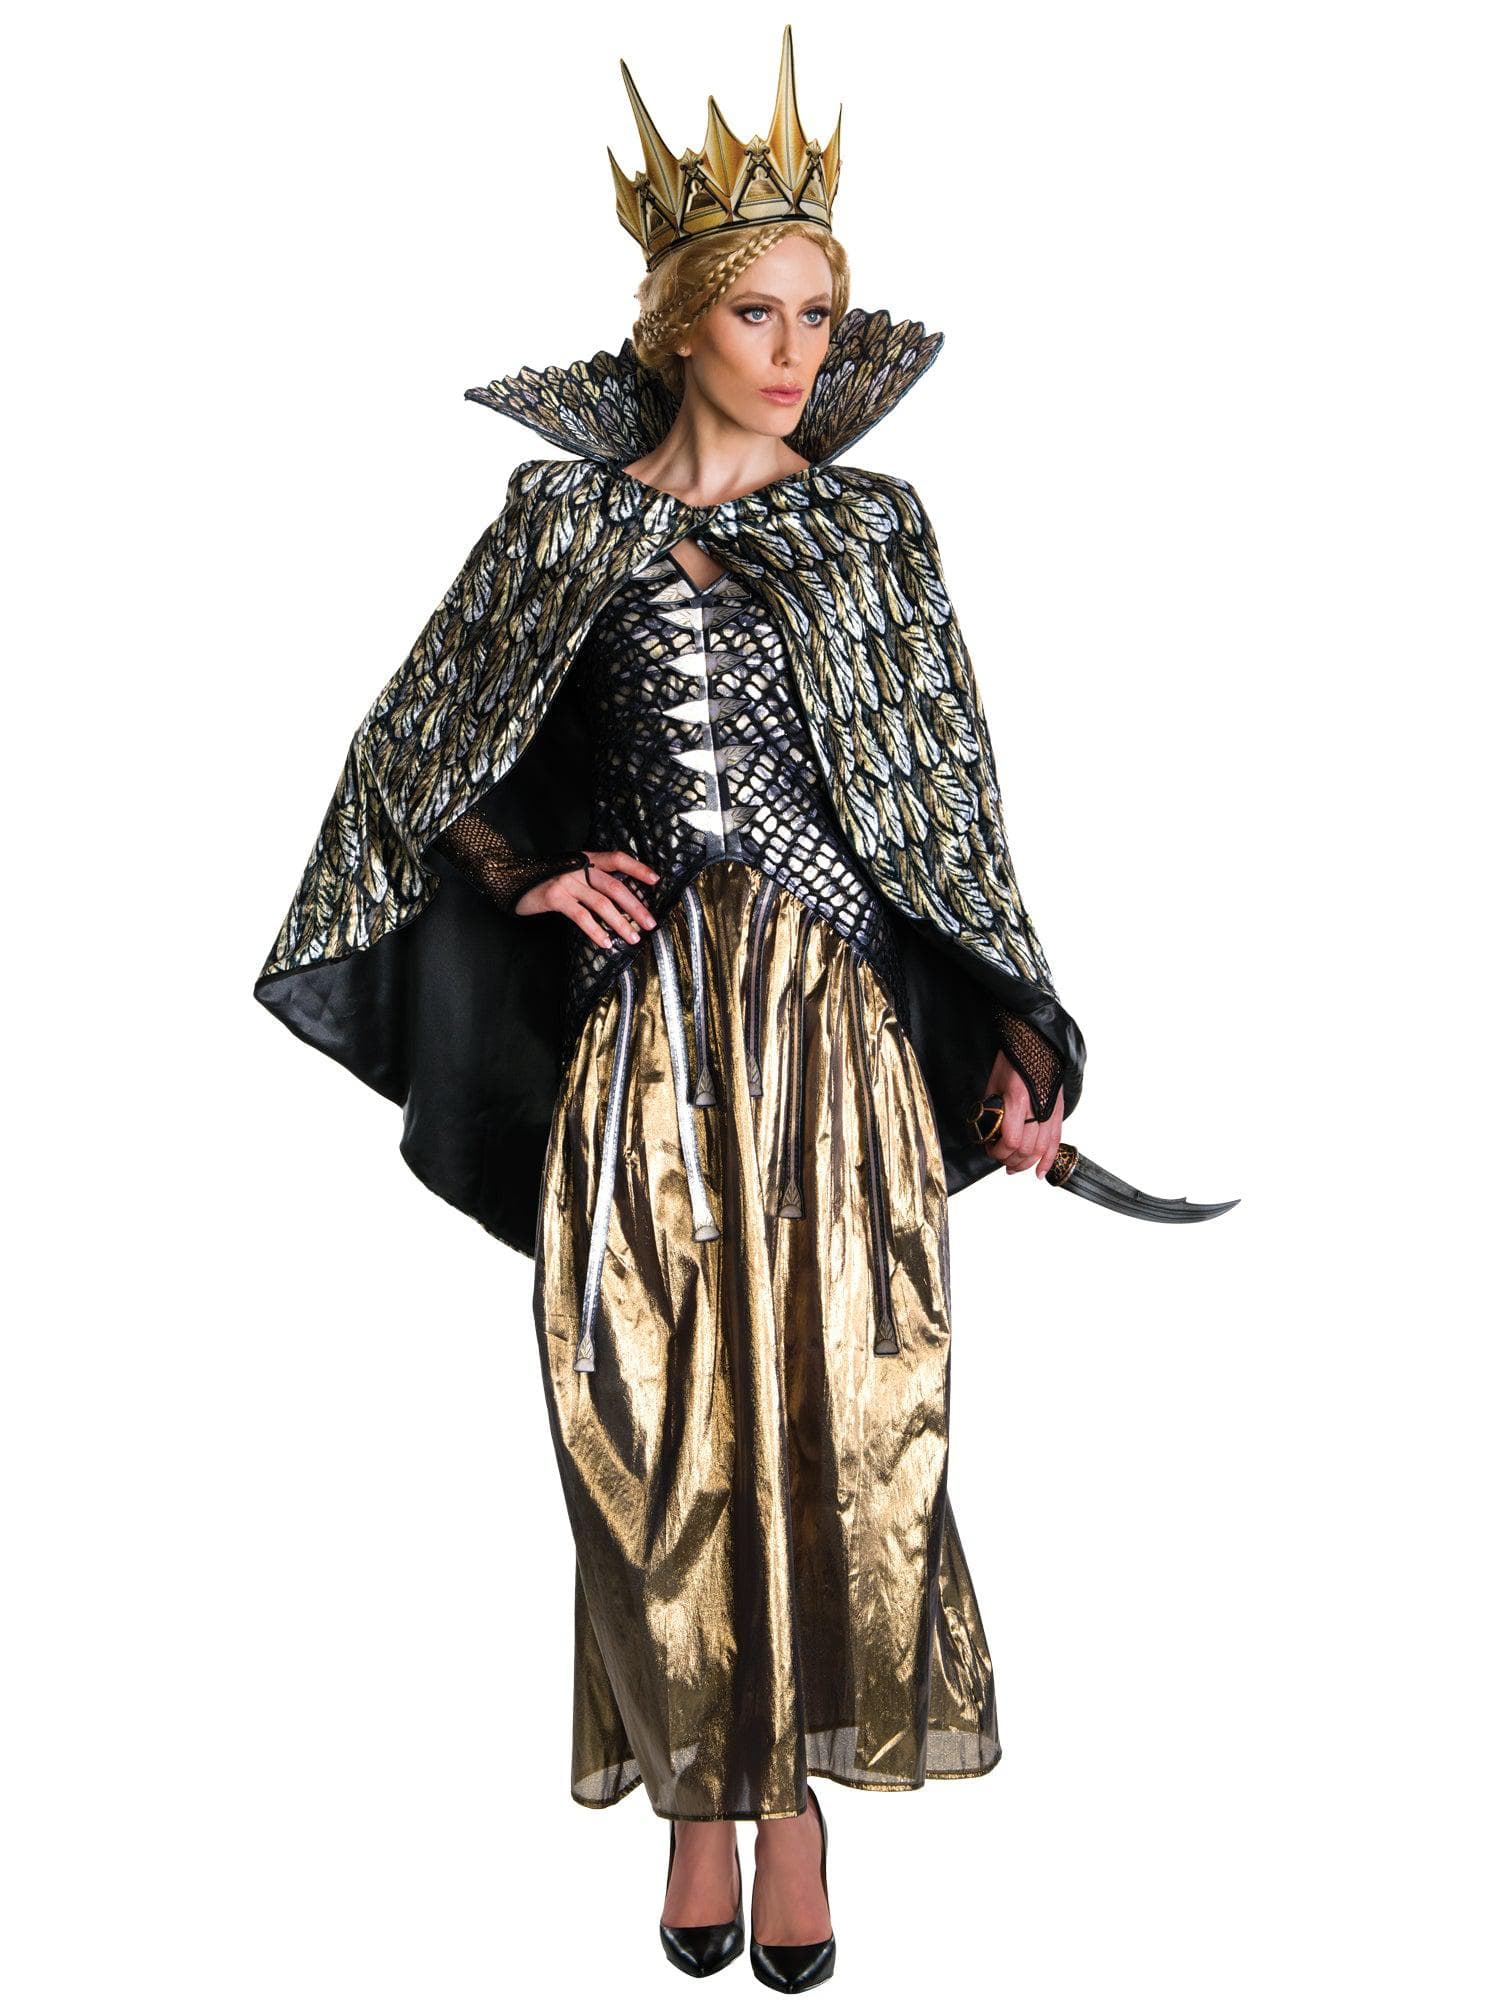 Women's Snow White and the Huntsman Queen Ravenna Gold Costume - Deluxe - costumes.com